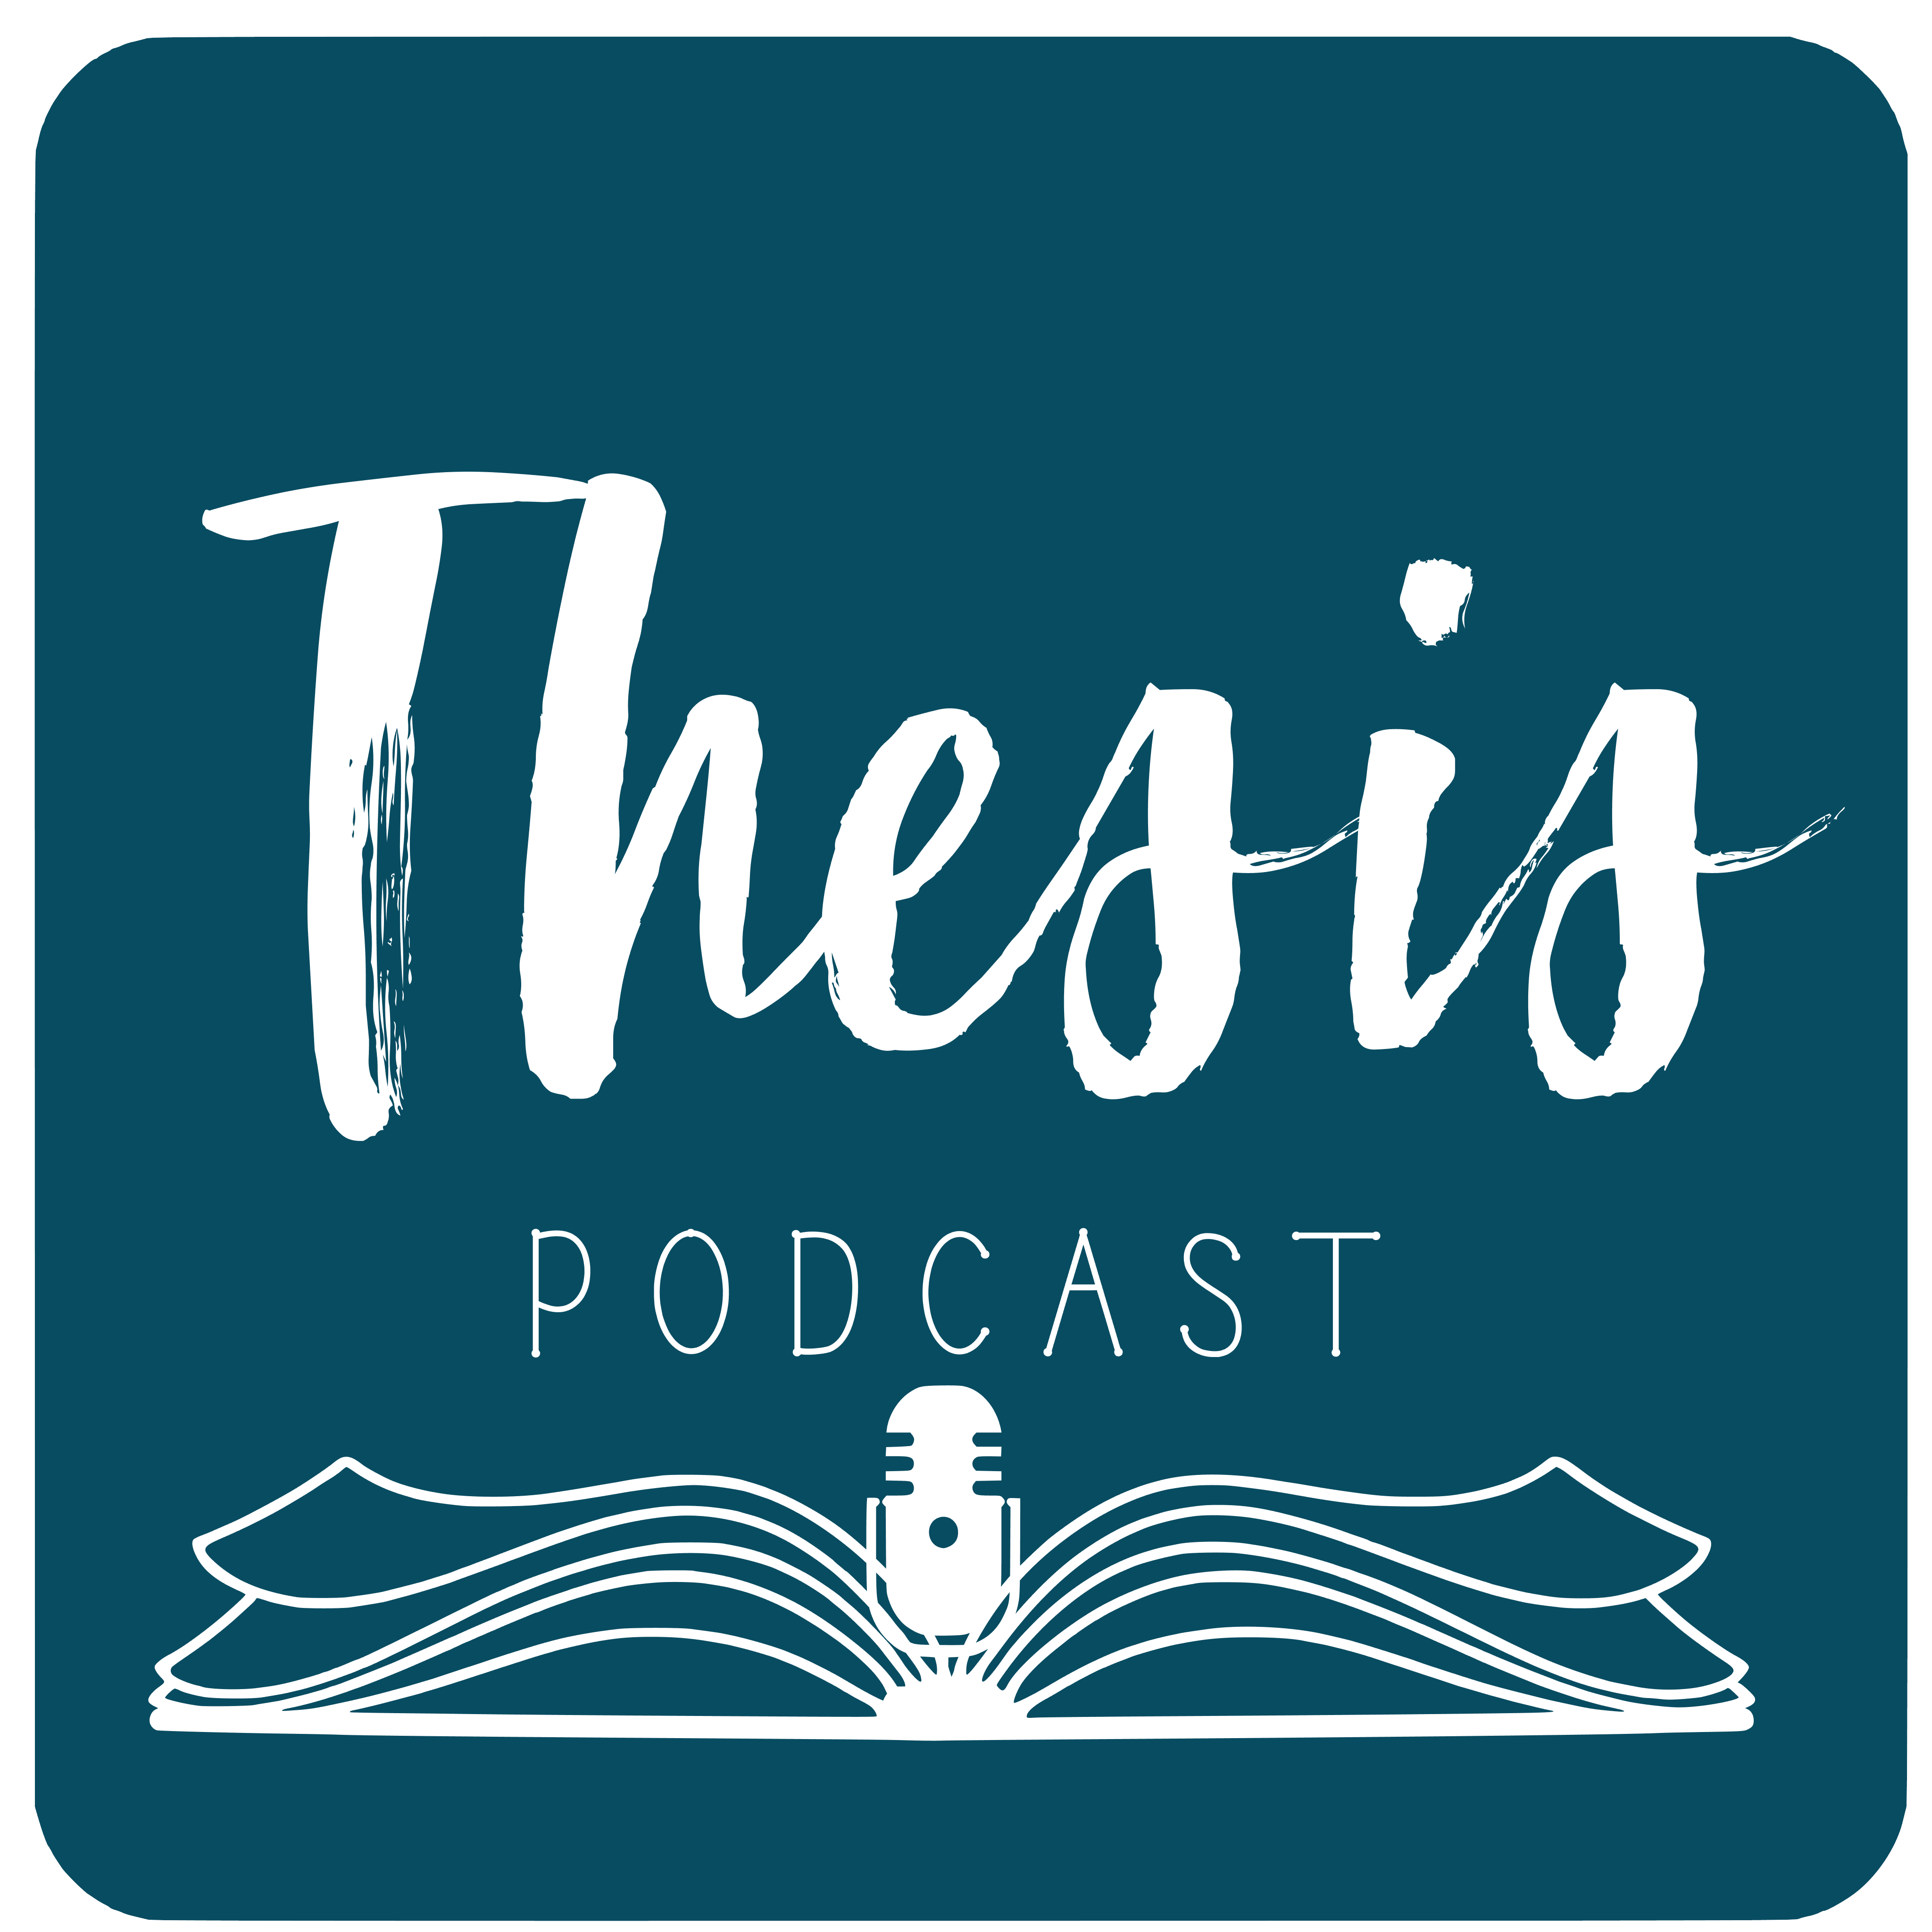 The THESIS podcast